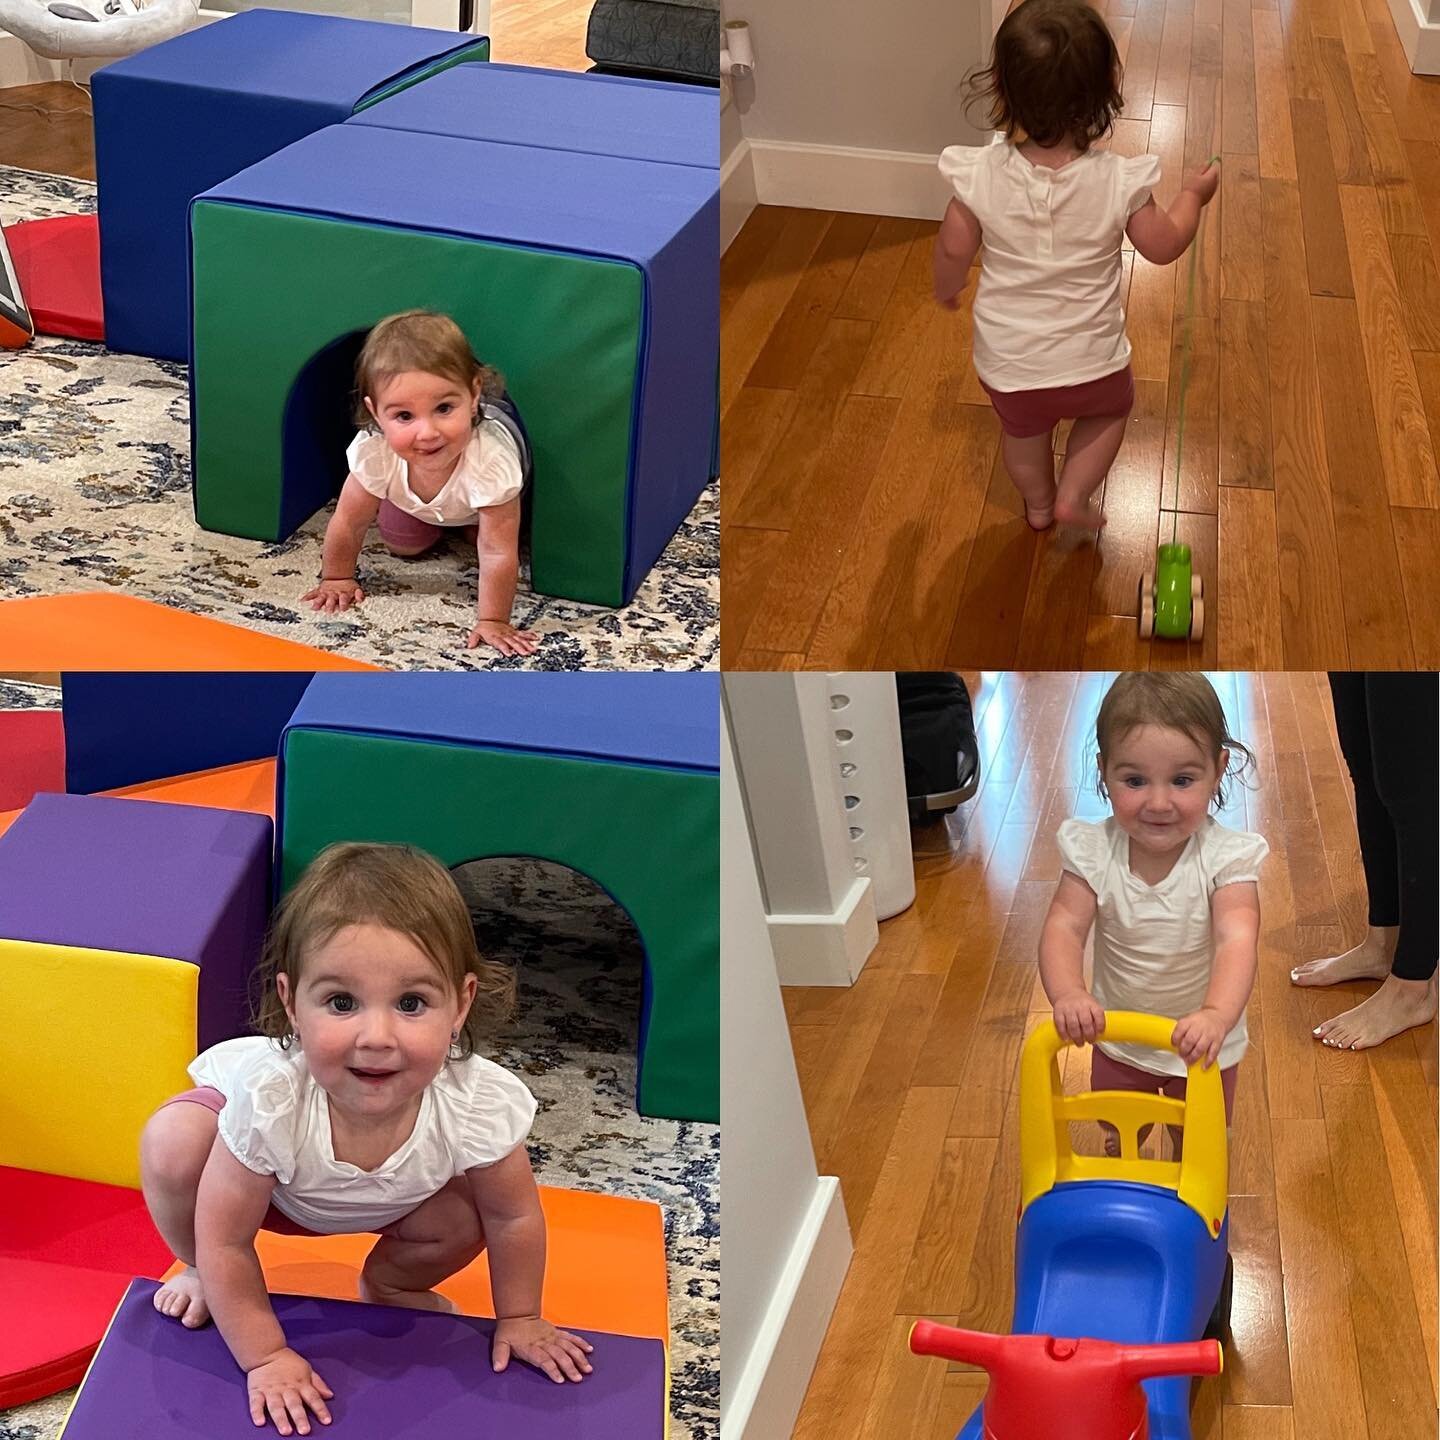 Crawling, climbing, pushing, and pulling are just some of the fun activities we do in our Tiny Tots classes.